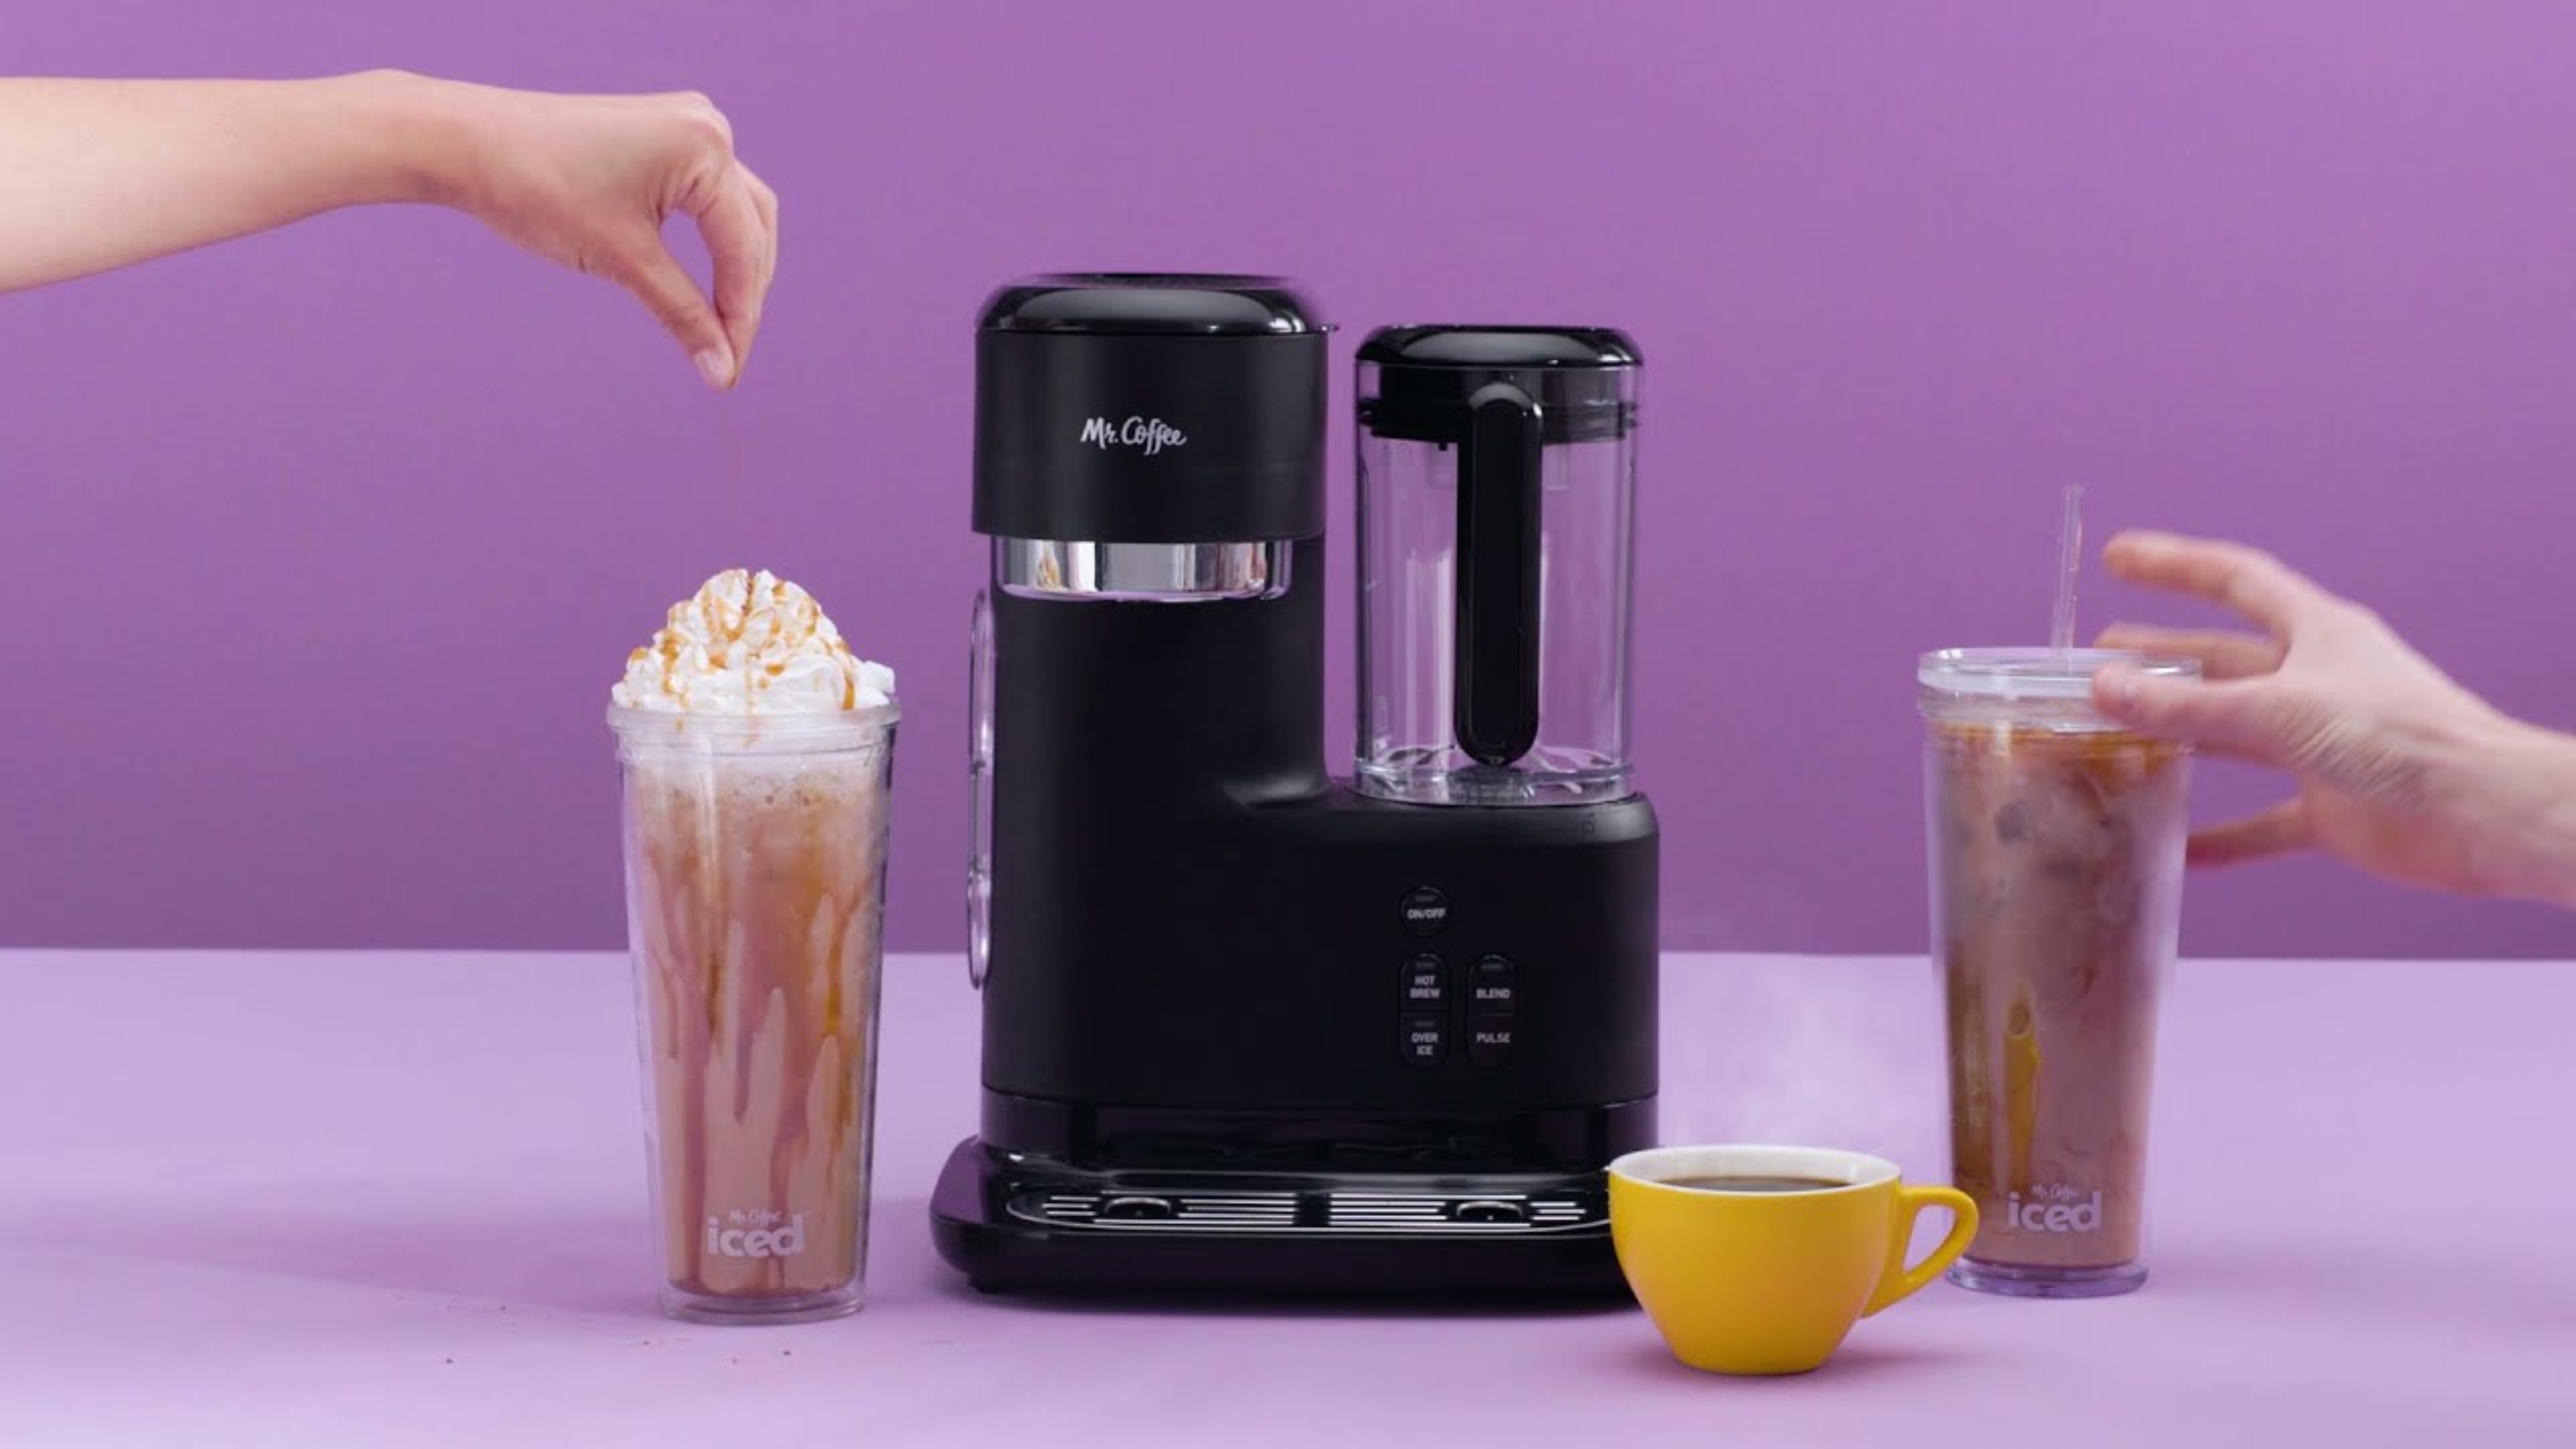 Mr. Coffee Single Serve Frappe and Iced Coffee Maker with Blender